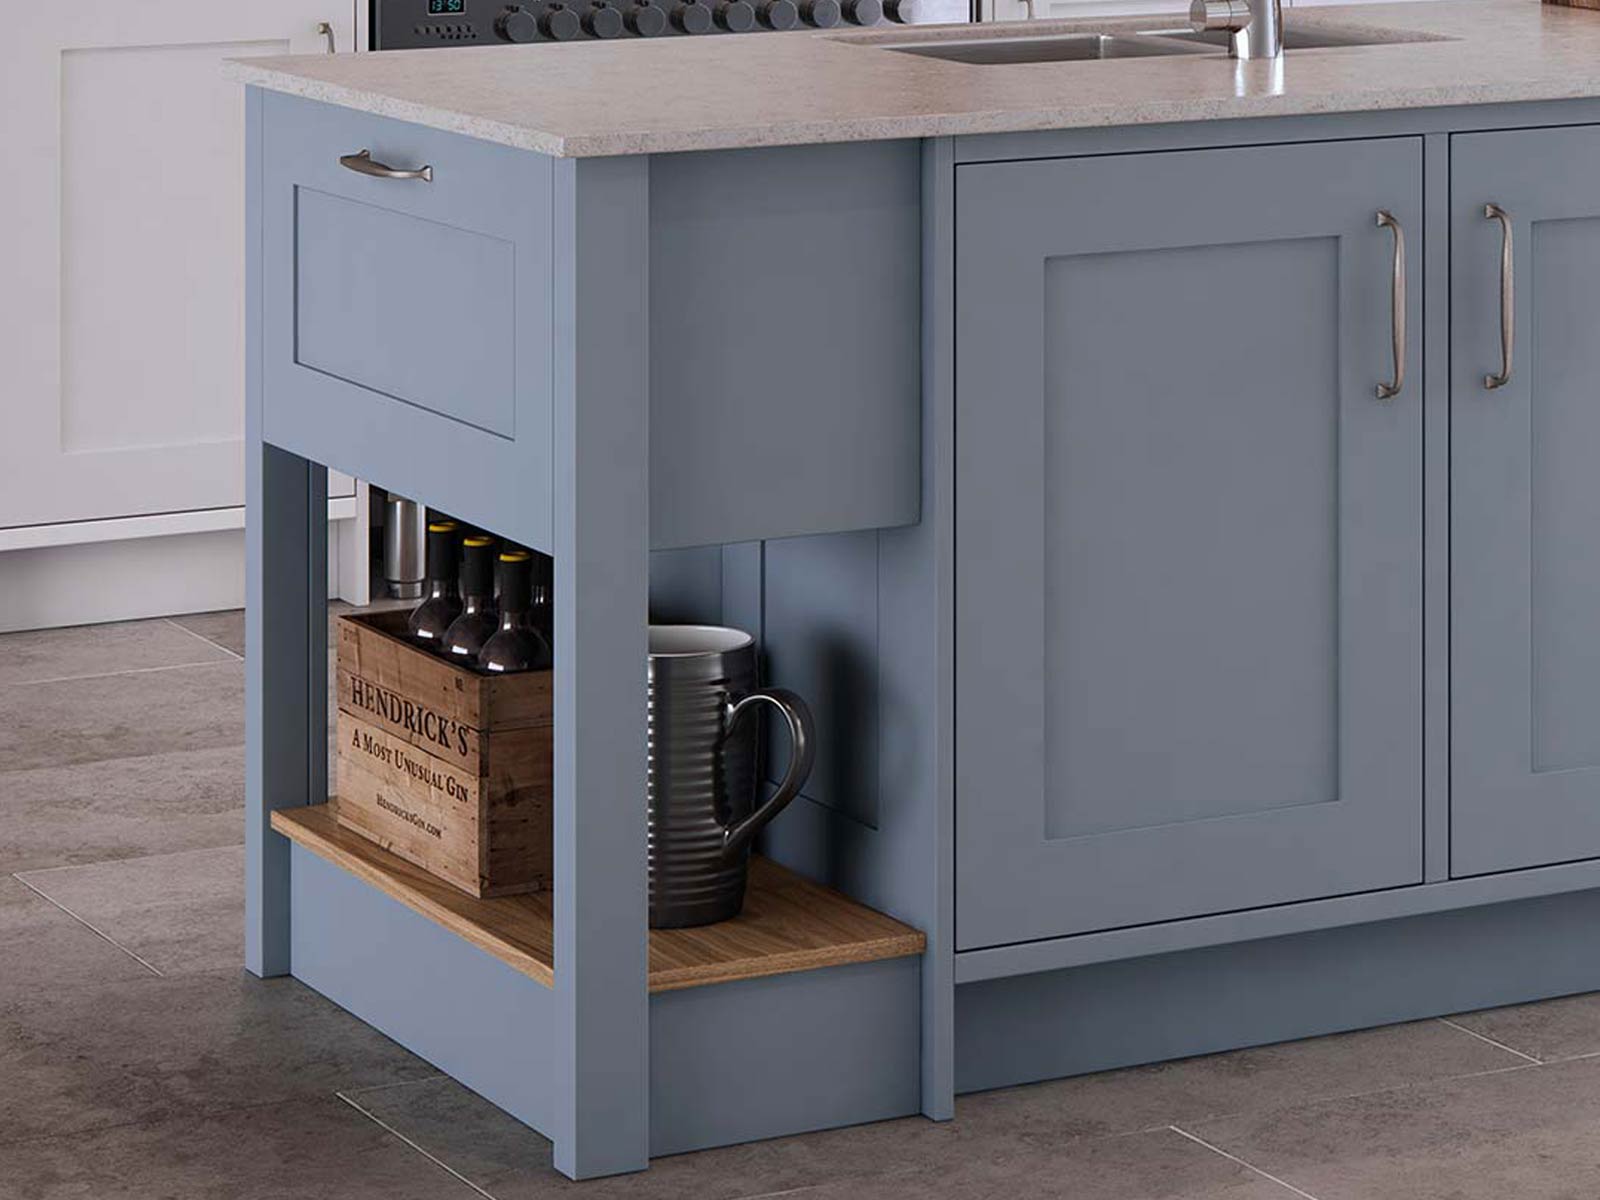 A powder blue kitchen range and chef’s table with Portland Oak shelving